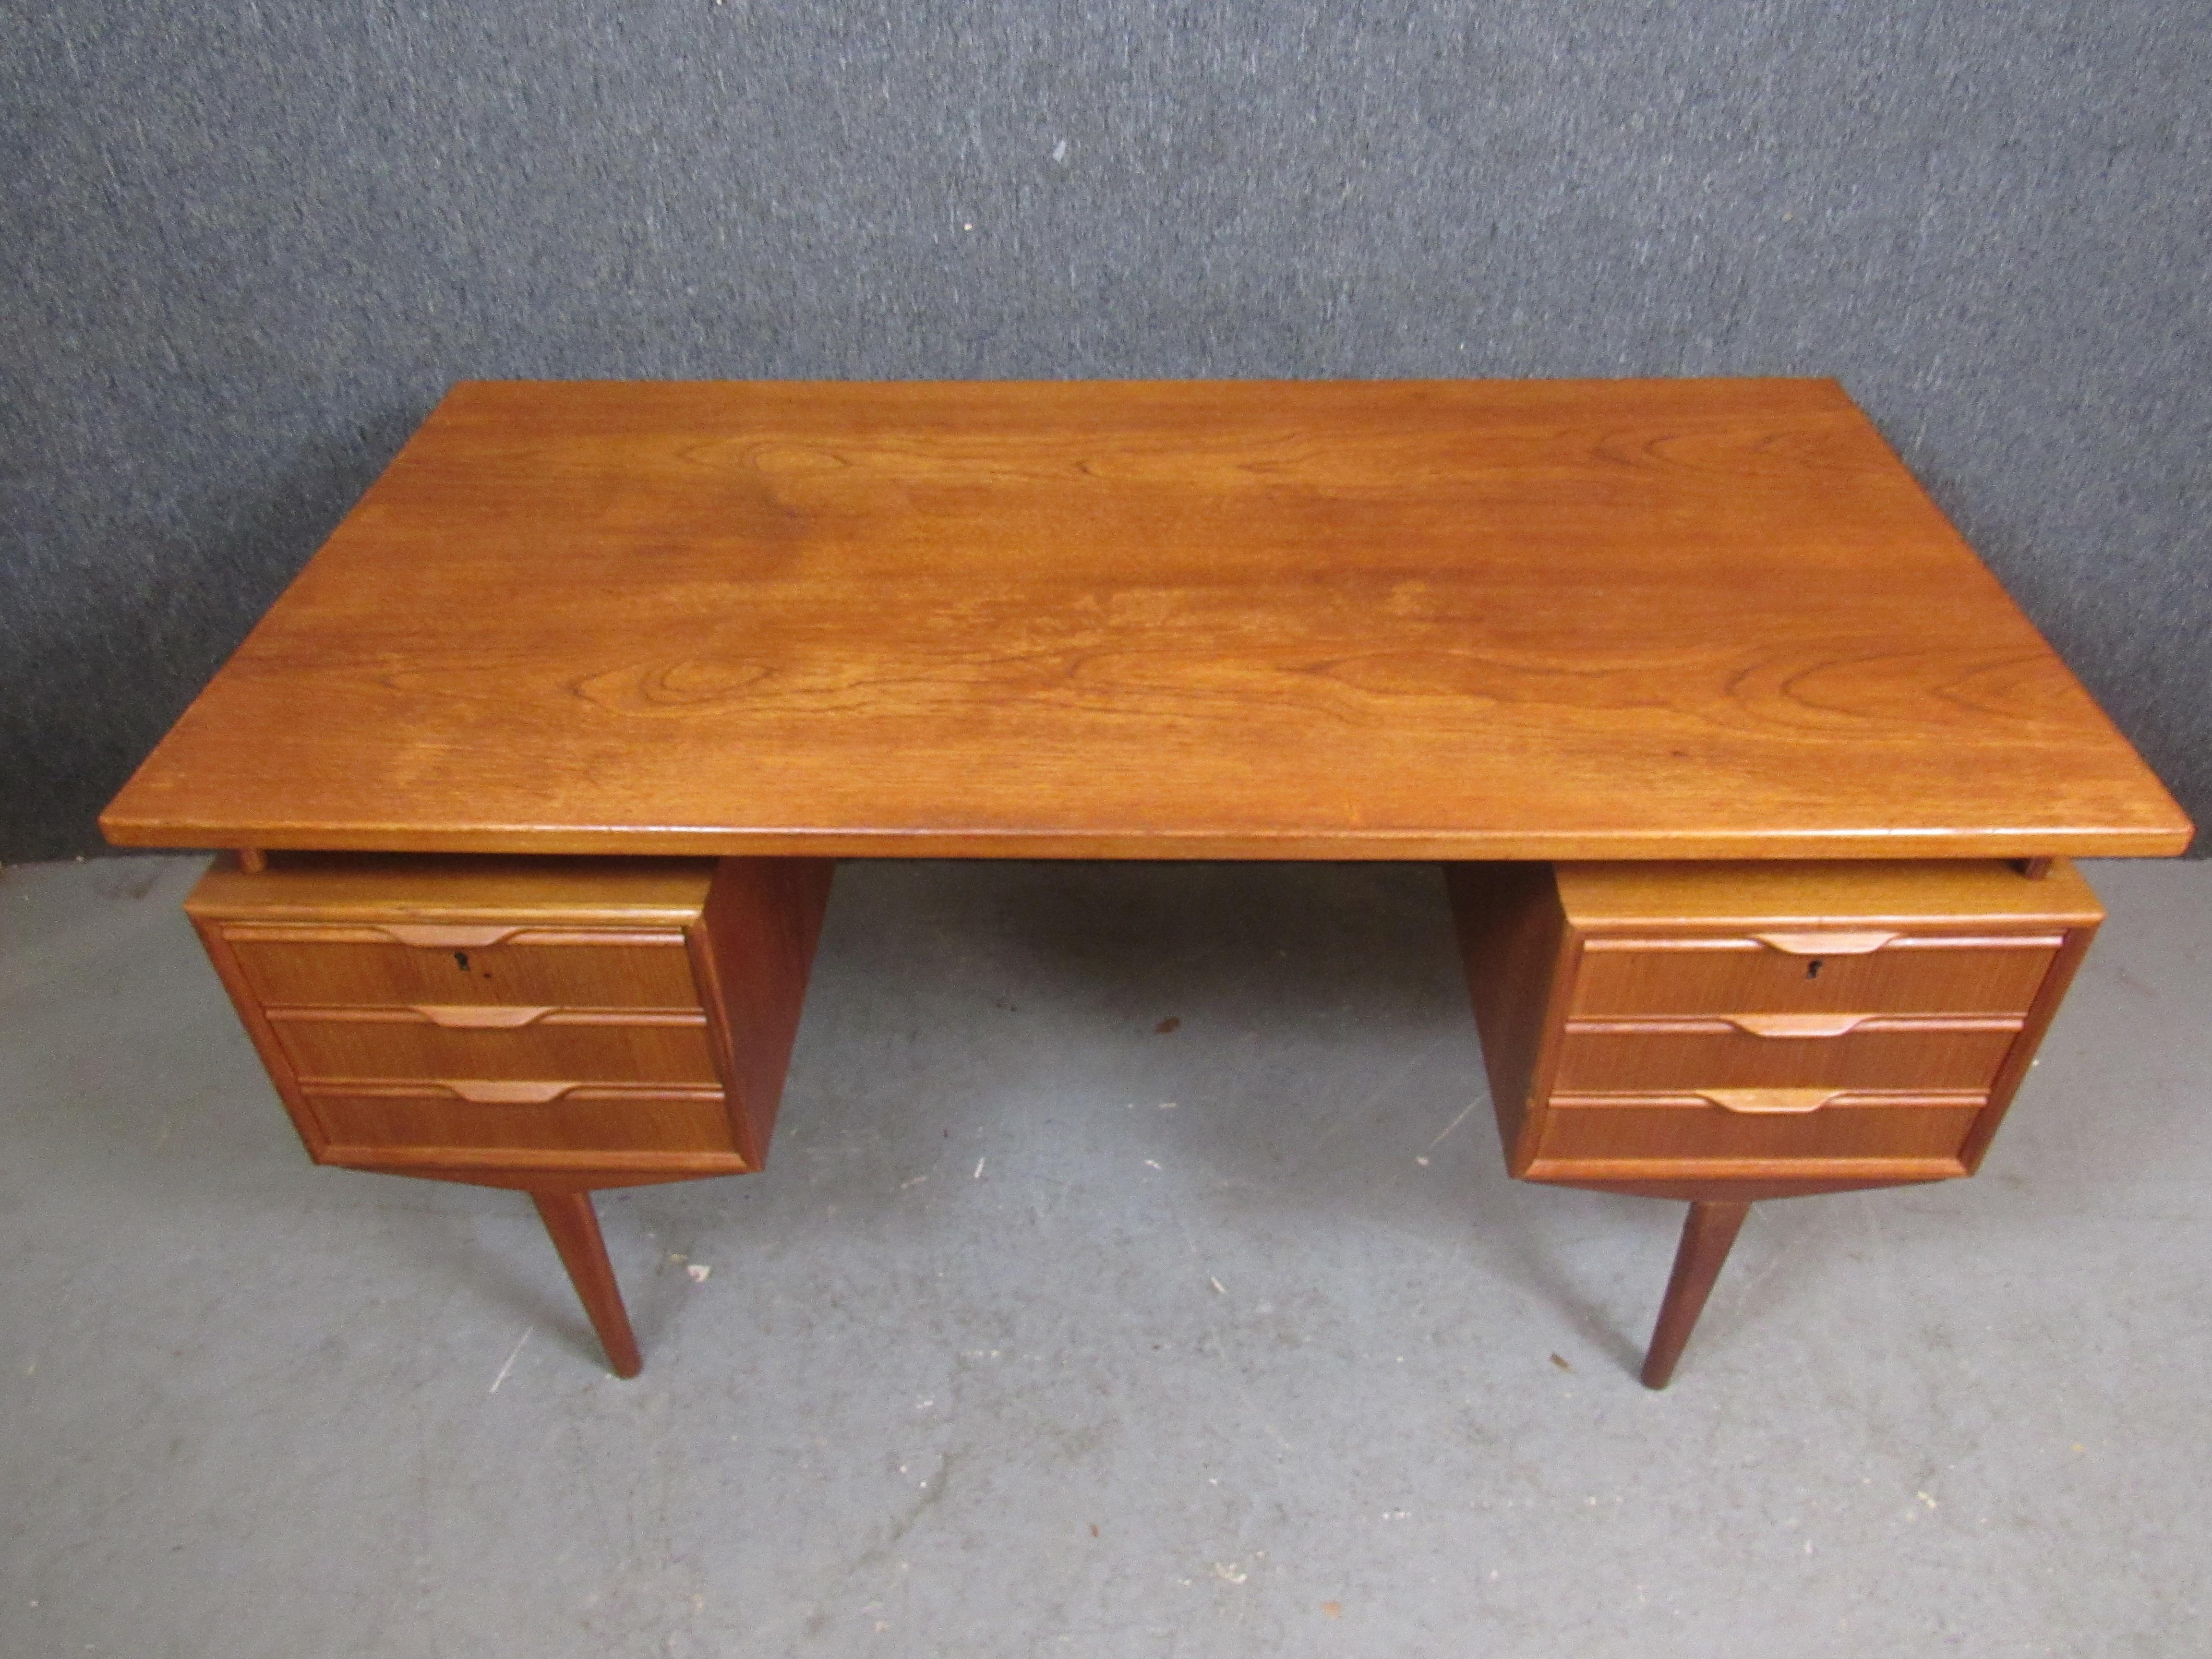 Whether in the home, office, or home office- this vintage Scandinavian teak desk is sure to impress! With a stunning floating top, sculptural pedestal legs, generous teak grain, and a fully-finished back featuring an ingenious built-in bookshelf